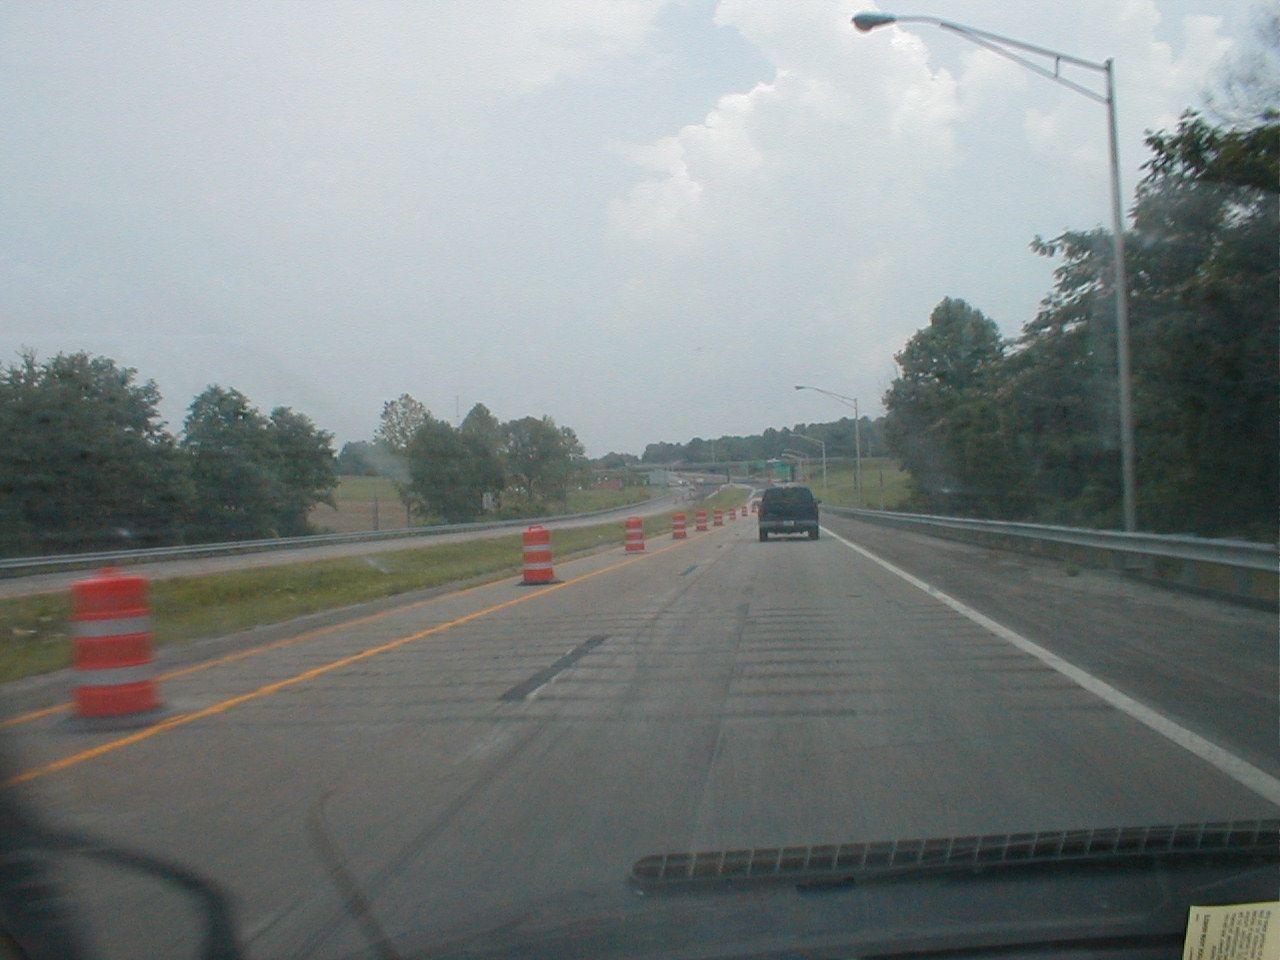 Approach to former toll booths at Exit 62